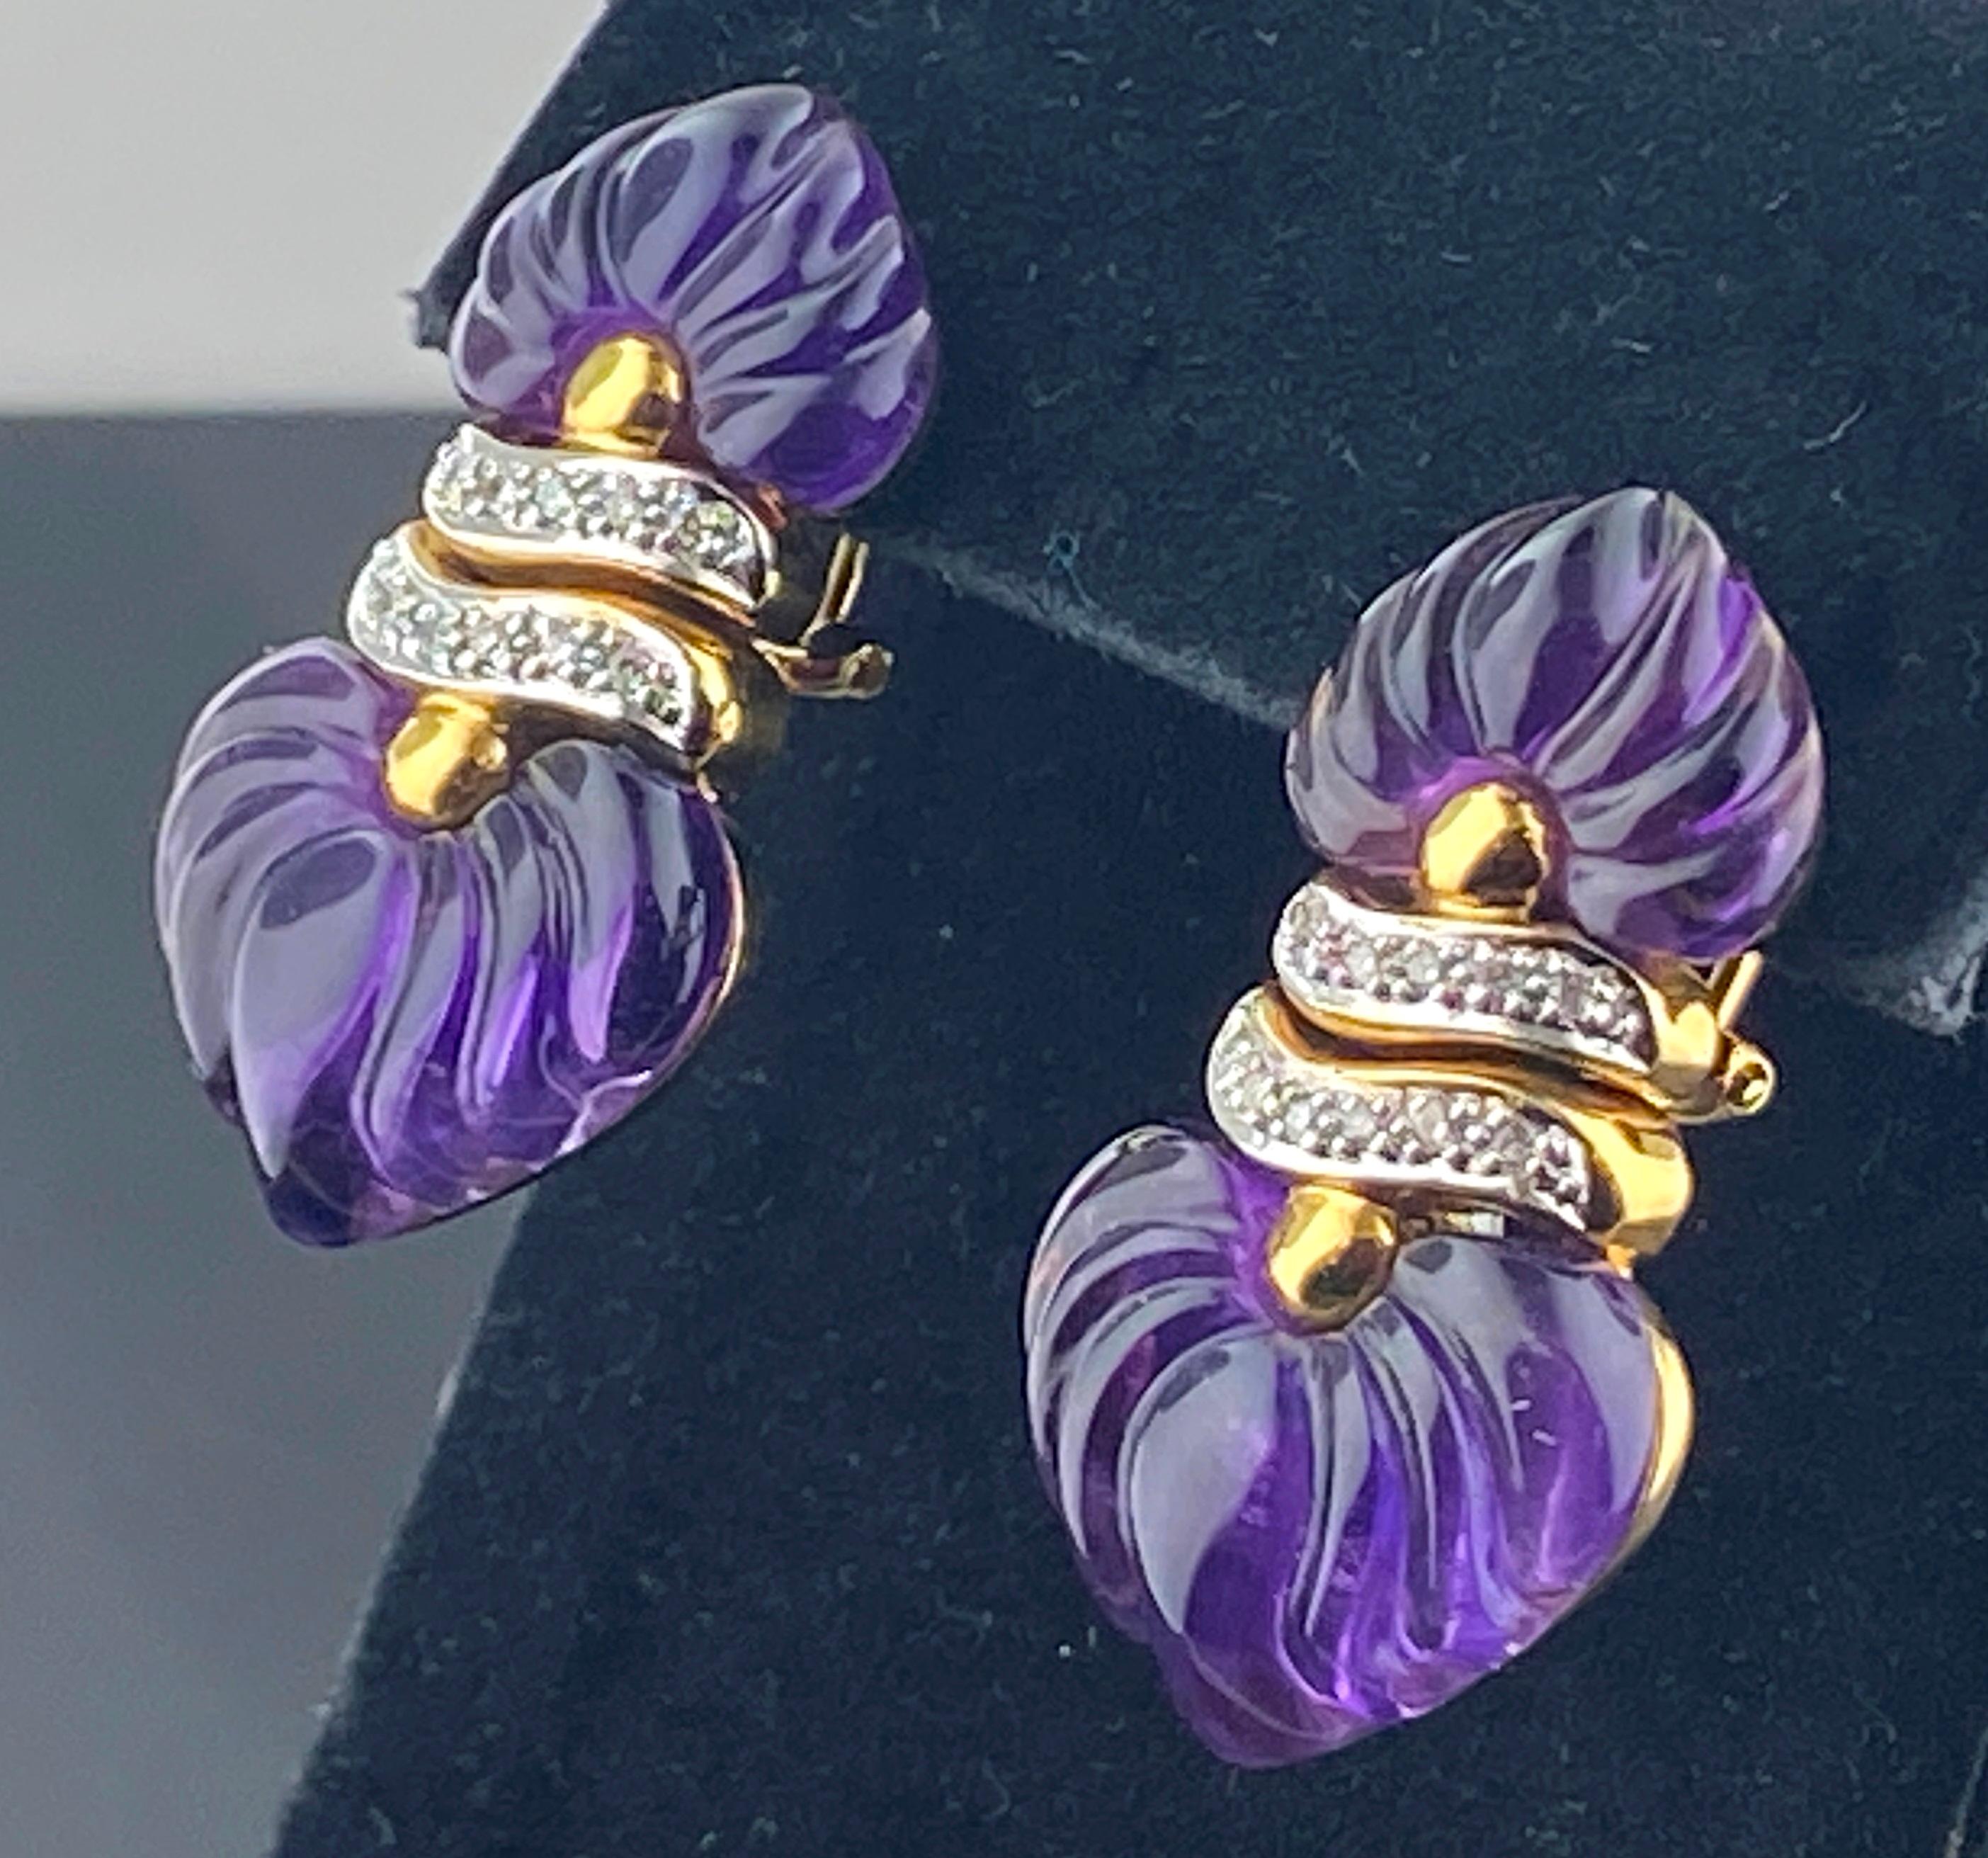 Set in 18 karat yellow gold are 4 pieces of carved Amethyst with 22 Round Brilliant Cut Diamonds with a total weight of 0.18 carats.